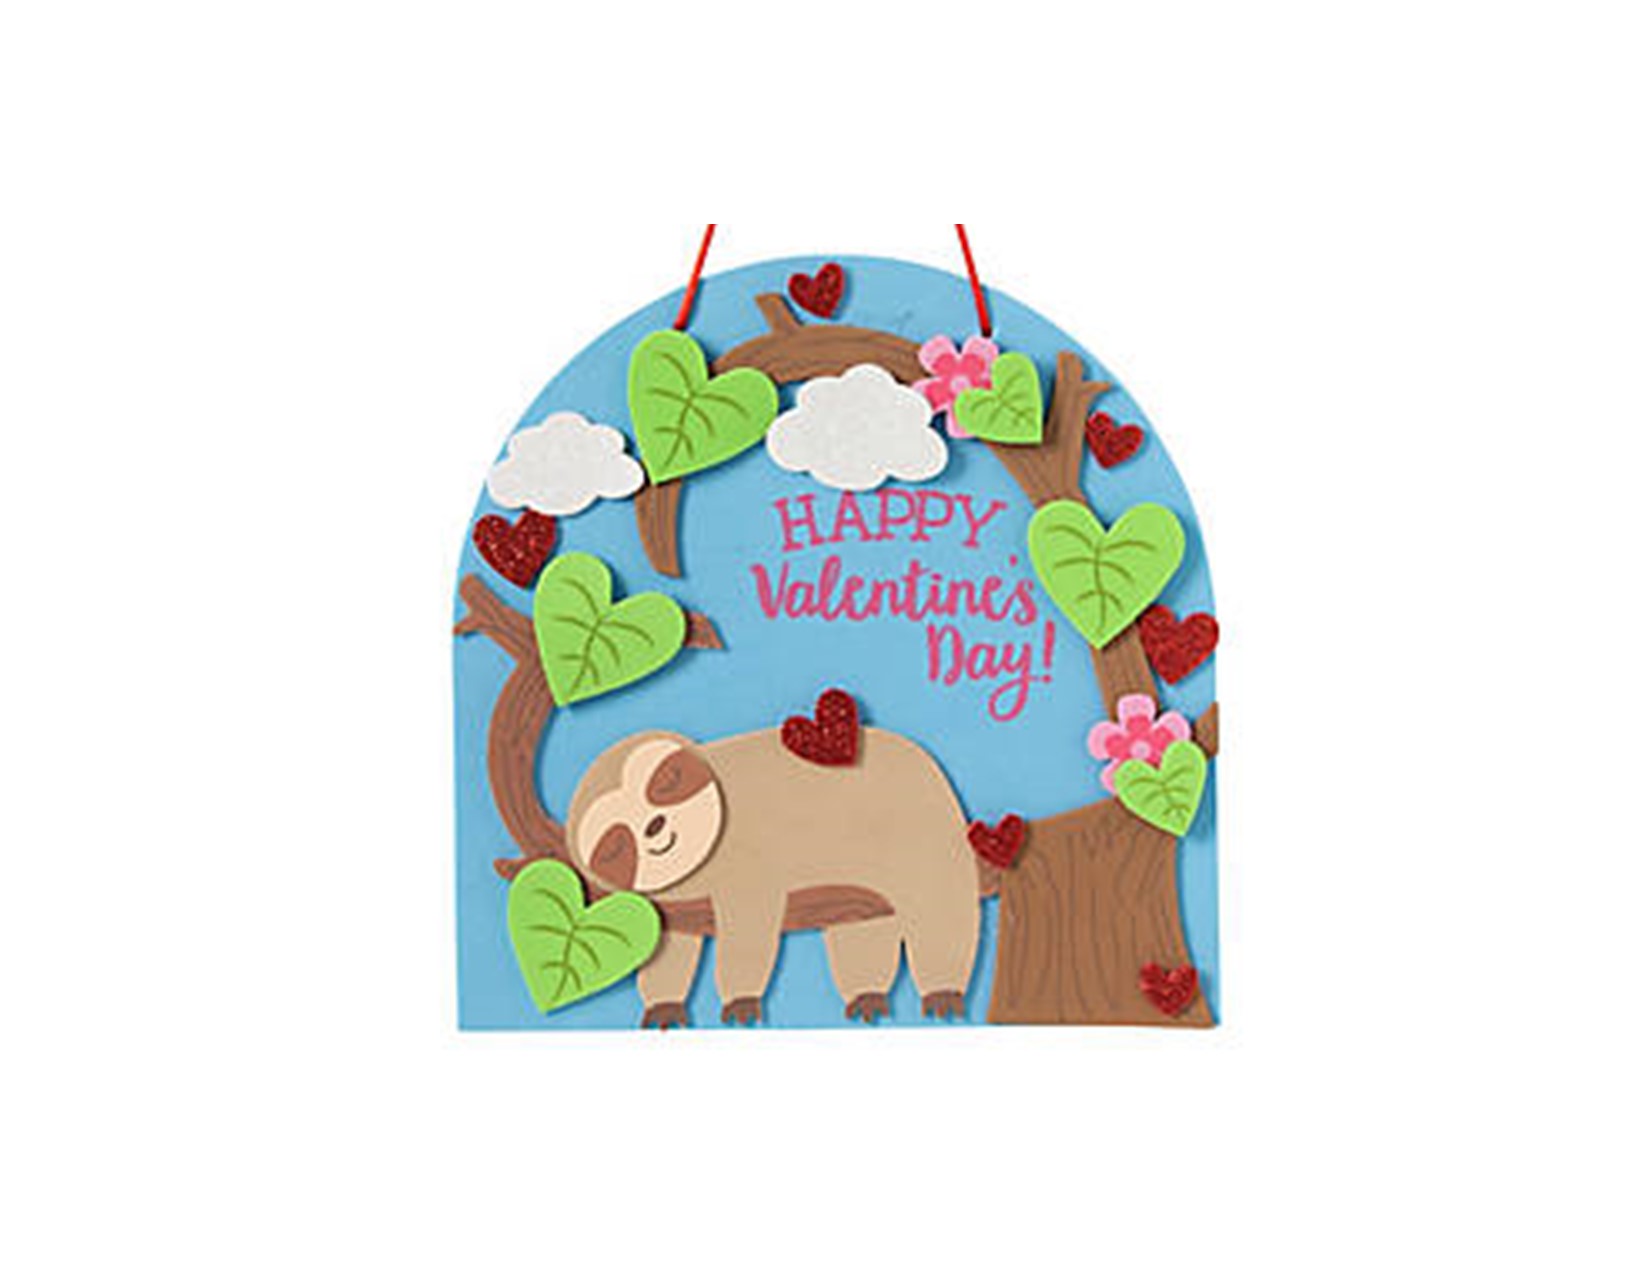 sloth sleeping in a heart shaped tree with heart shaped leaves